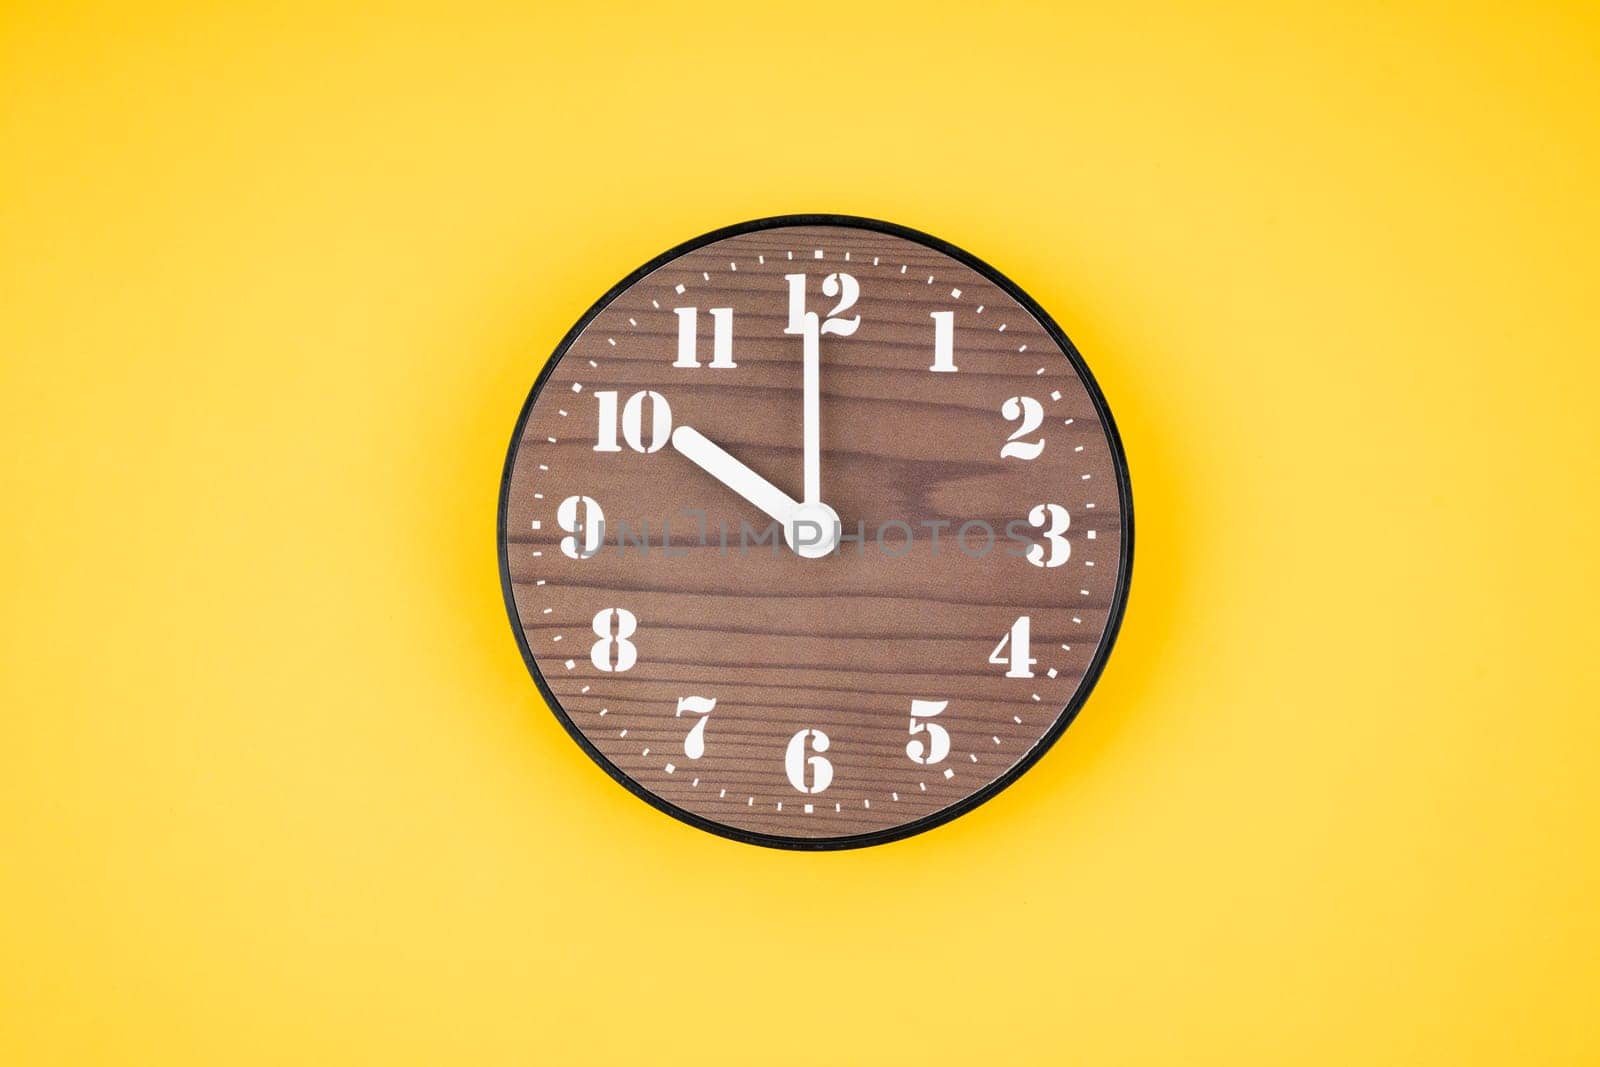 Retro wooden clock at 10 O' clock on yellow color background.